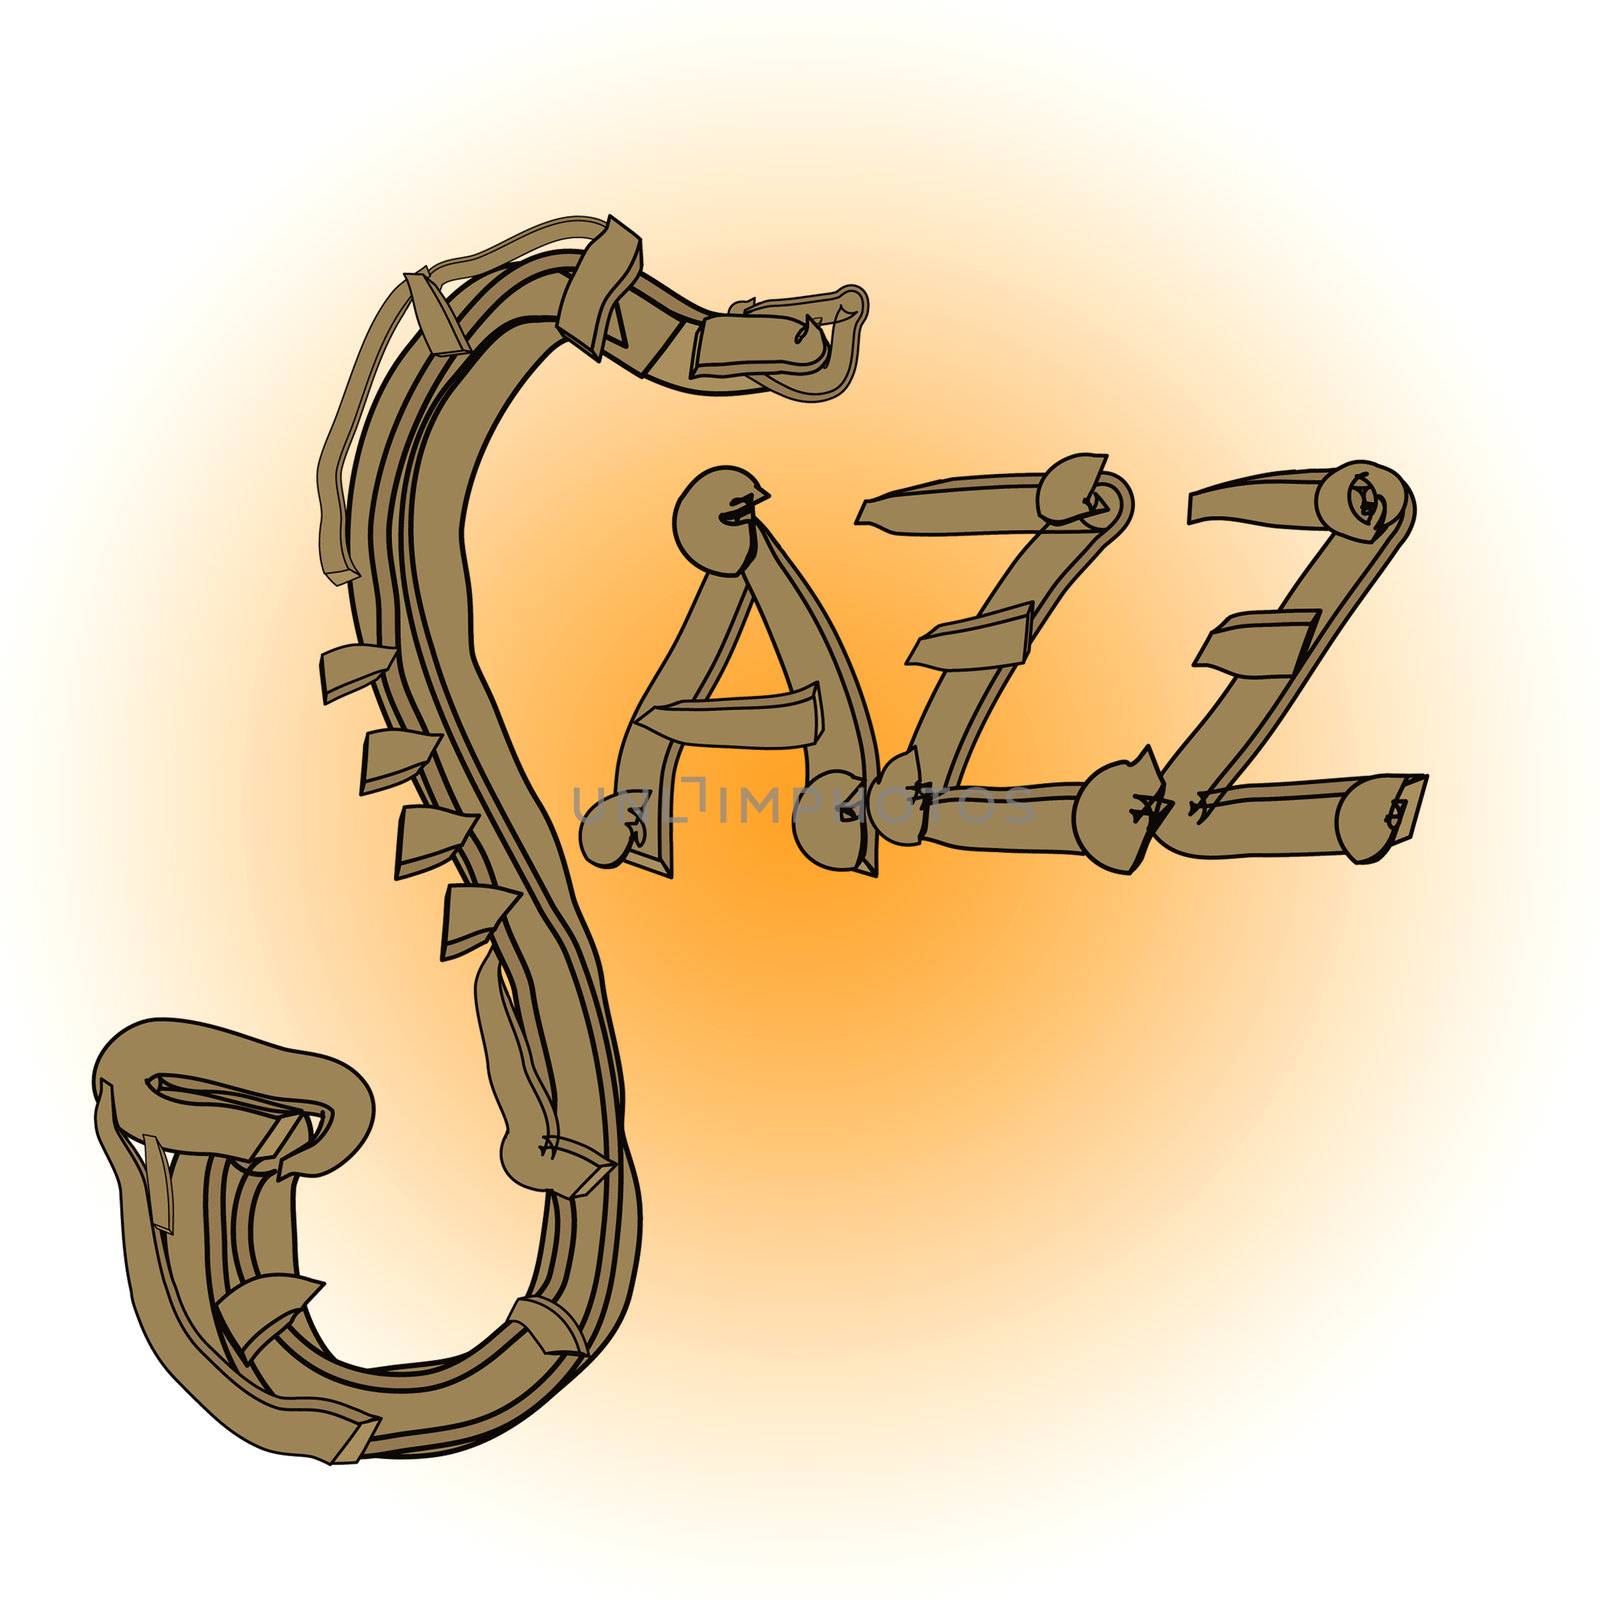 Jazz illustration with saxophone and letters